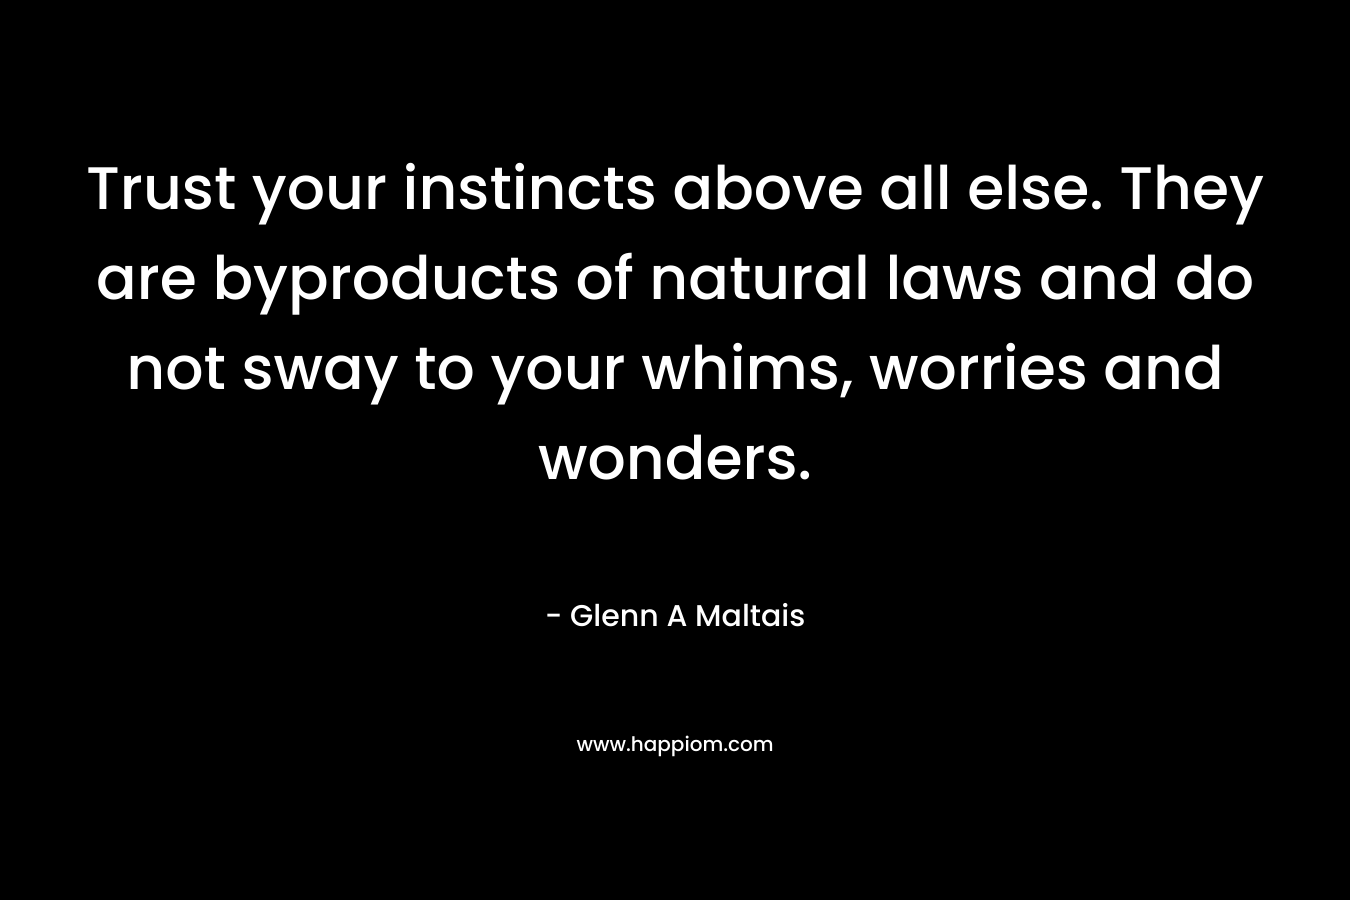 Trust your instincts above all else. They are byproducts of natural laws and do not sway to your whims, worries and wonders.